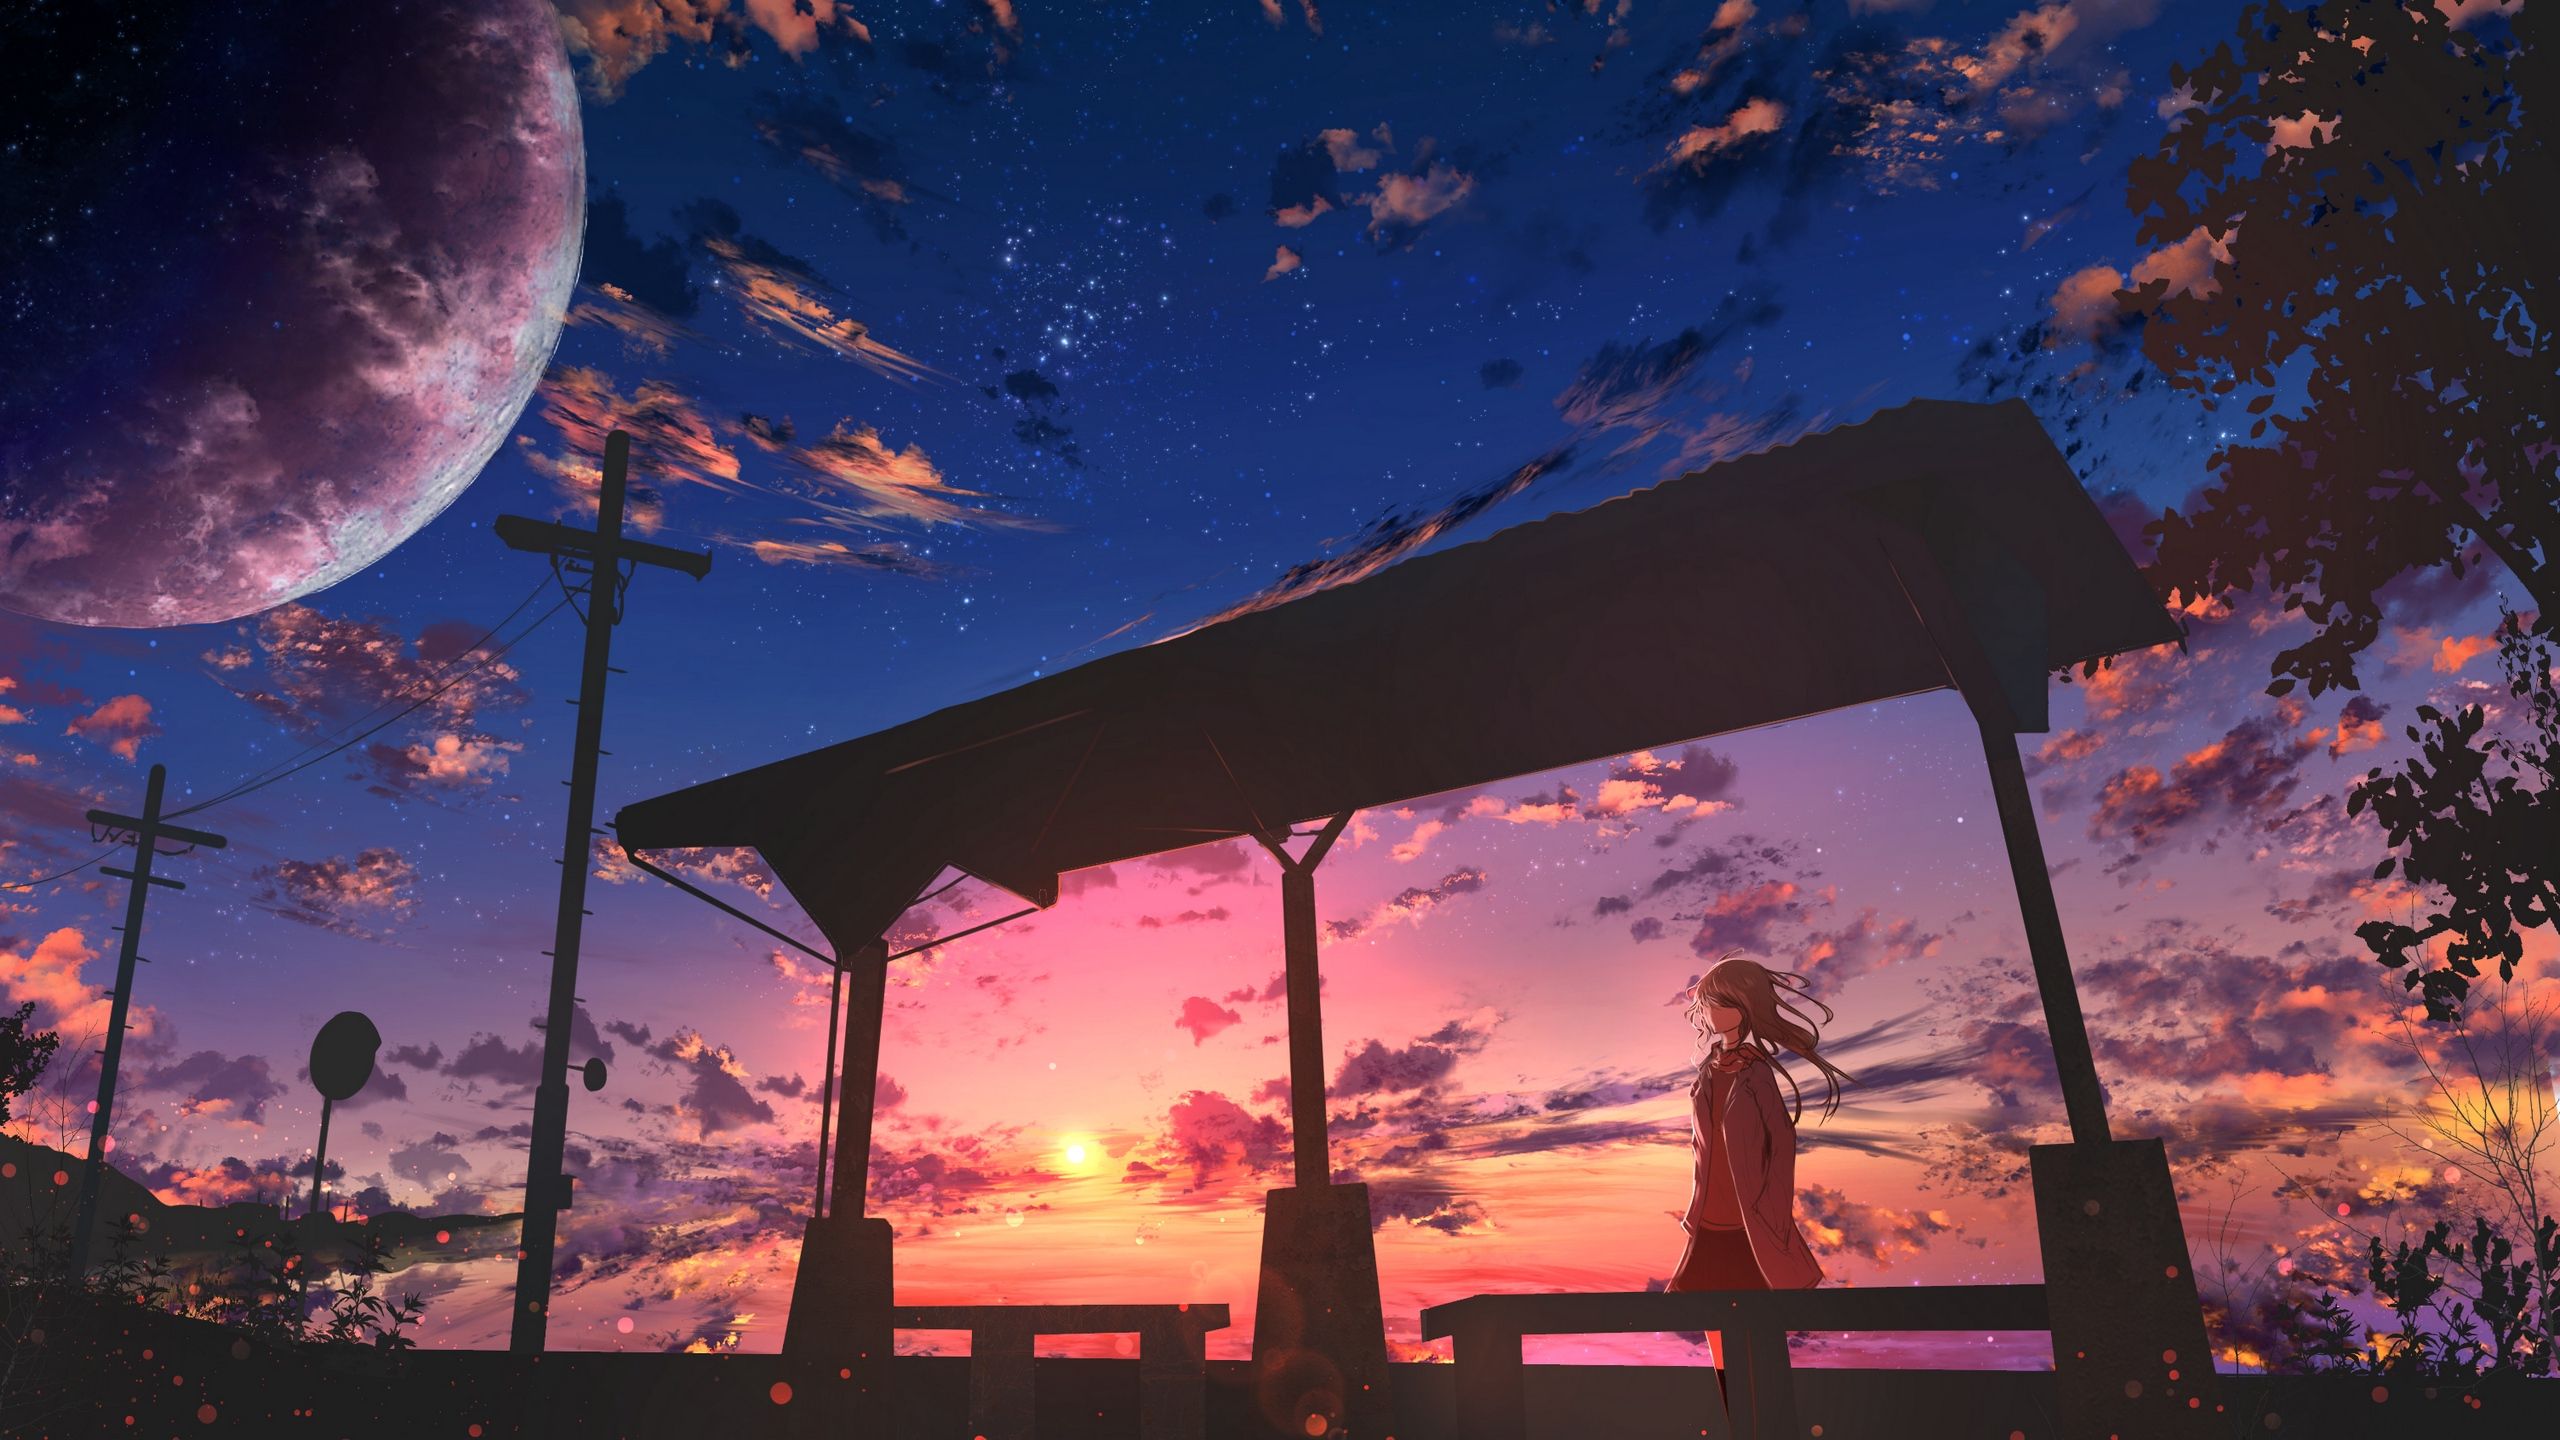 Download wallpaper 2560x1440 girl, twilight, clouds, anime